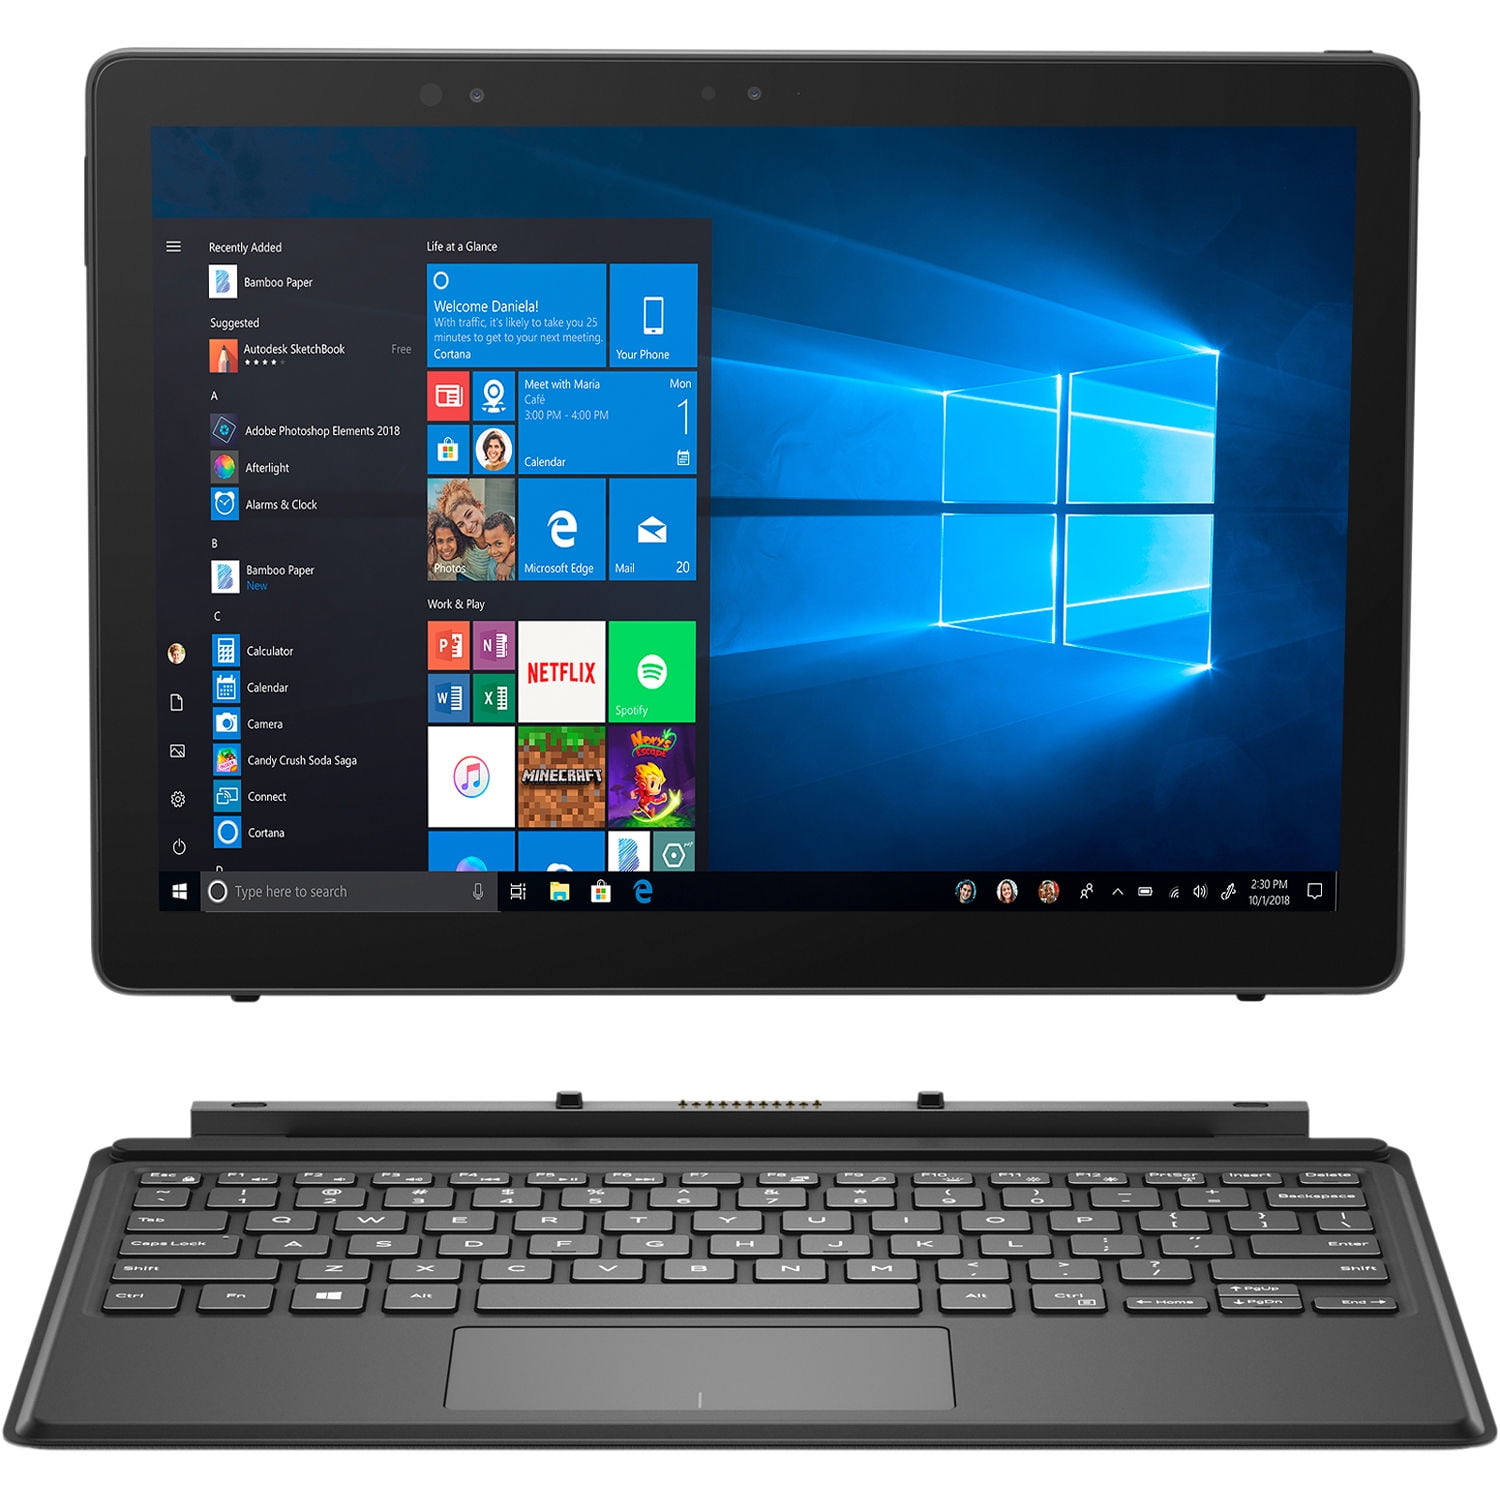 Buy DELL Latitude 5290 Intel Core i5 8th Gen 8350U ( GHz) 8 GB Memory  256 GB  SSD  Touchscreen 1920 x 1280 Detachable 2-in-1 Laptop  Windows 10 Pro 64bit Online at Lowest Price in Ubuy Russia. 647409620